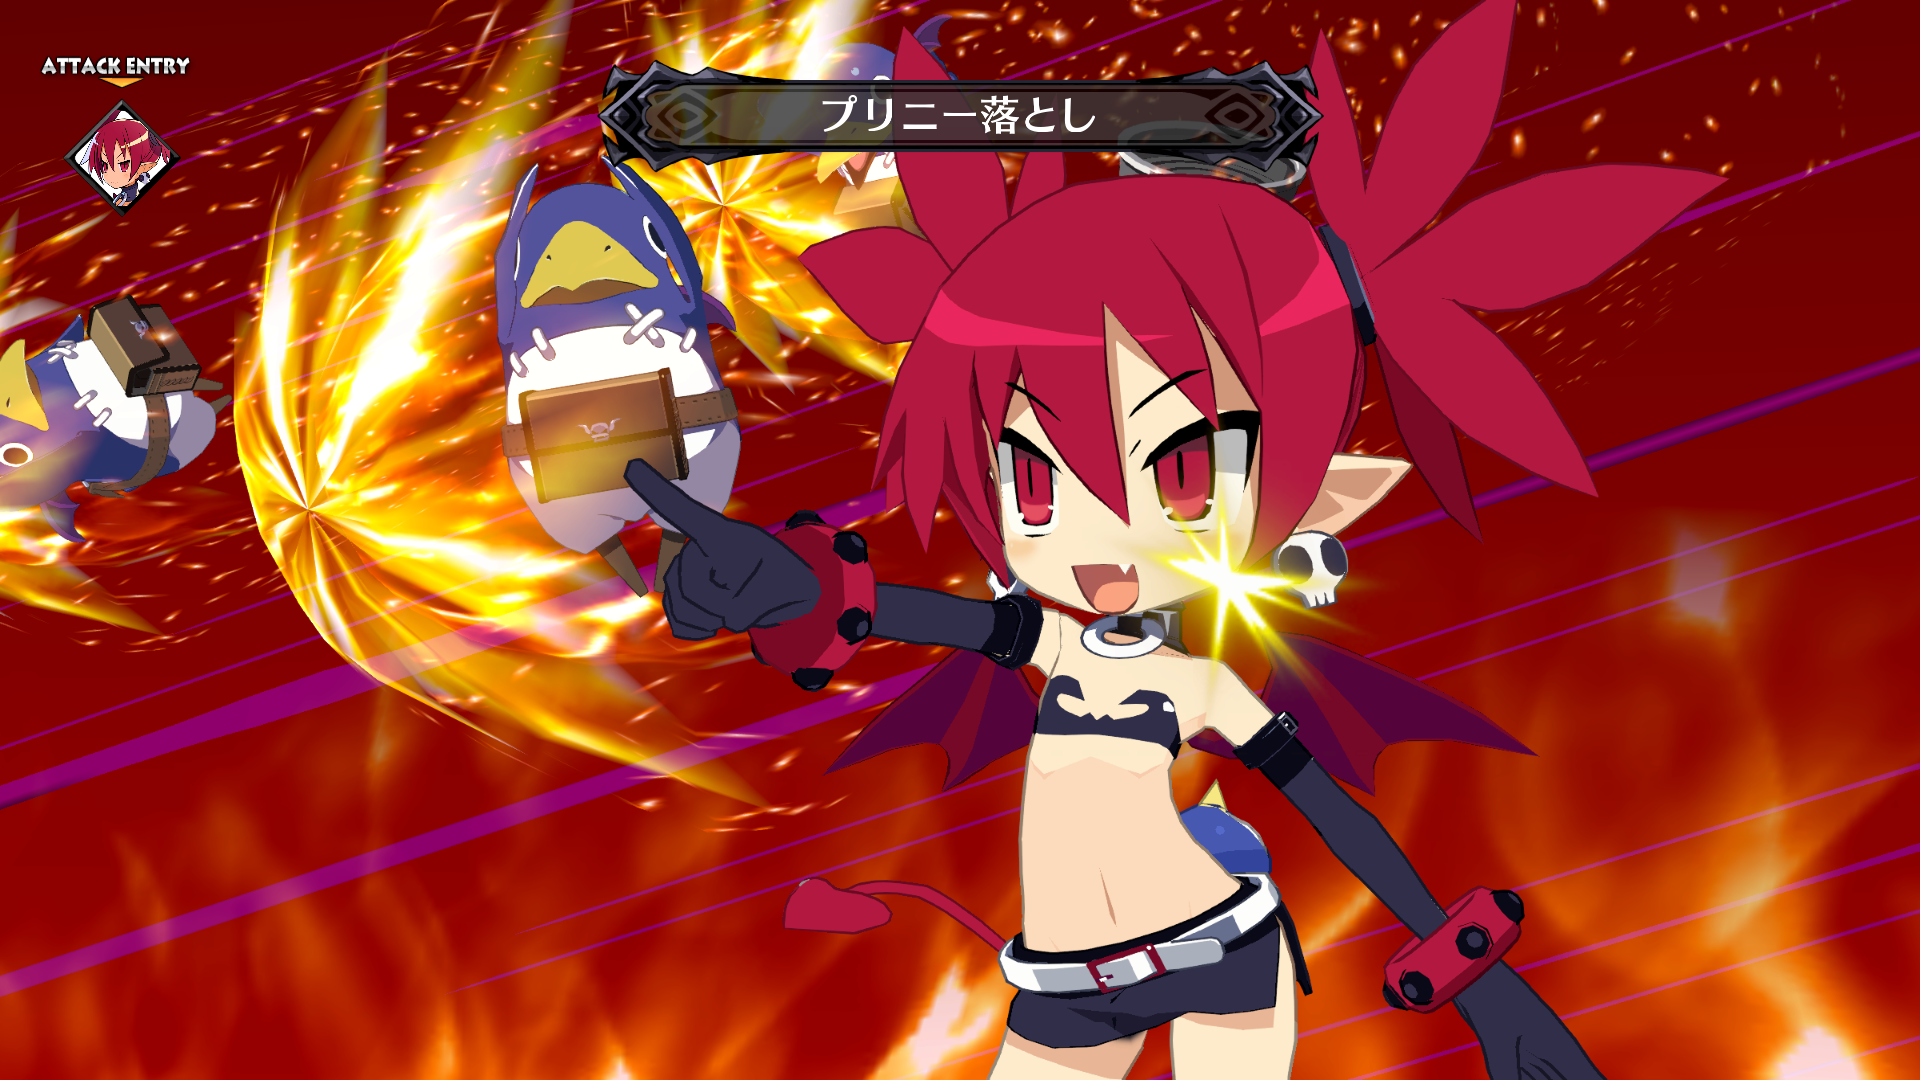 Disgaea 6: Defiance of Destiny details Disgaea 1 characters, Item Worlds, Team Attacks, and Giant Units